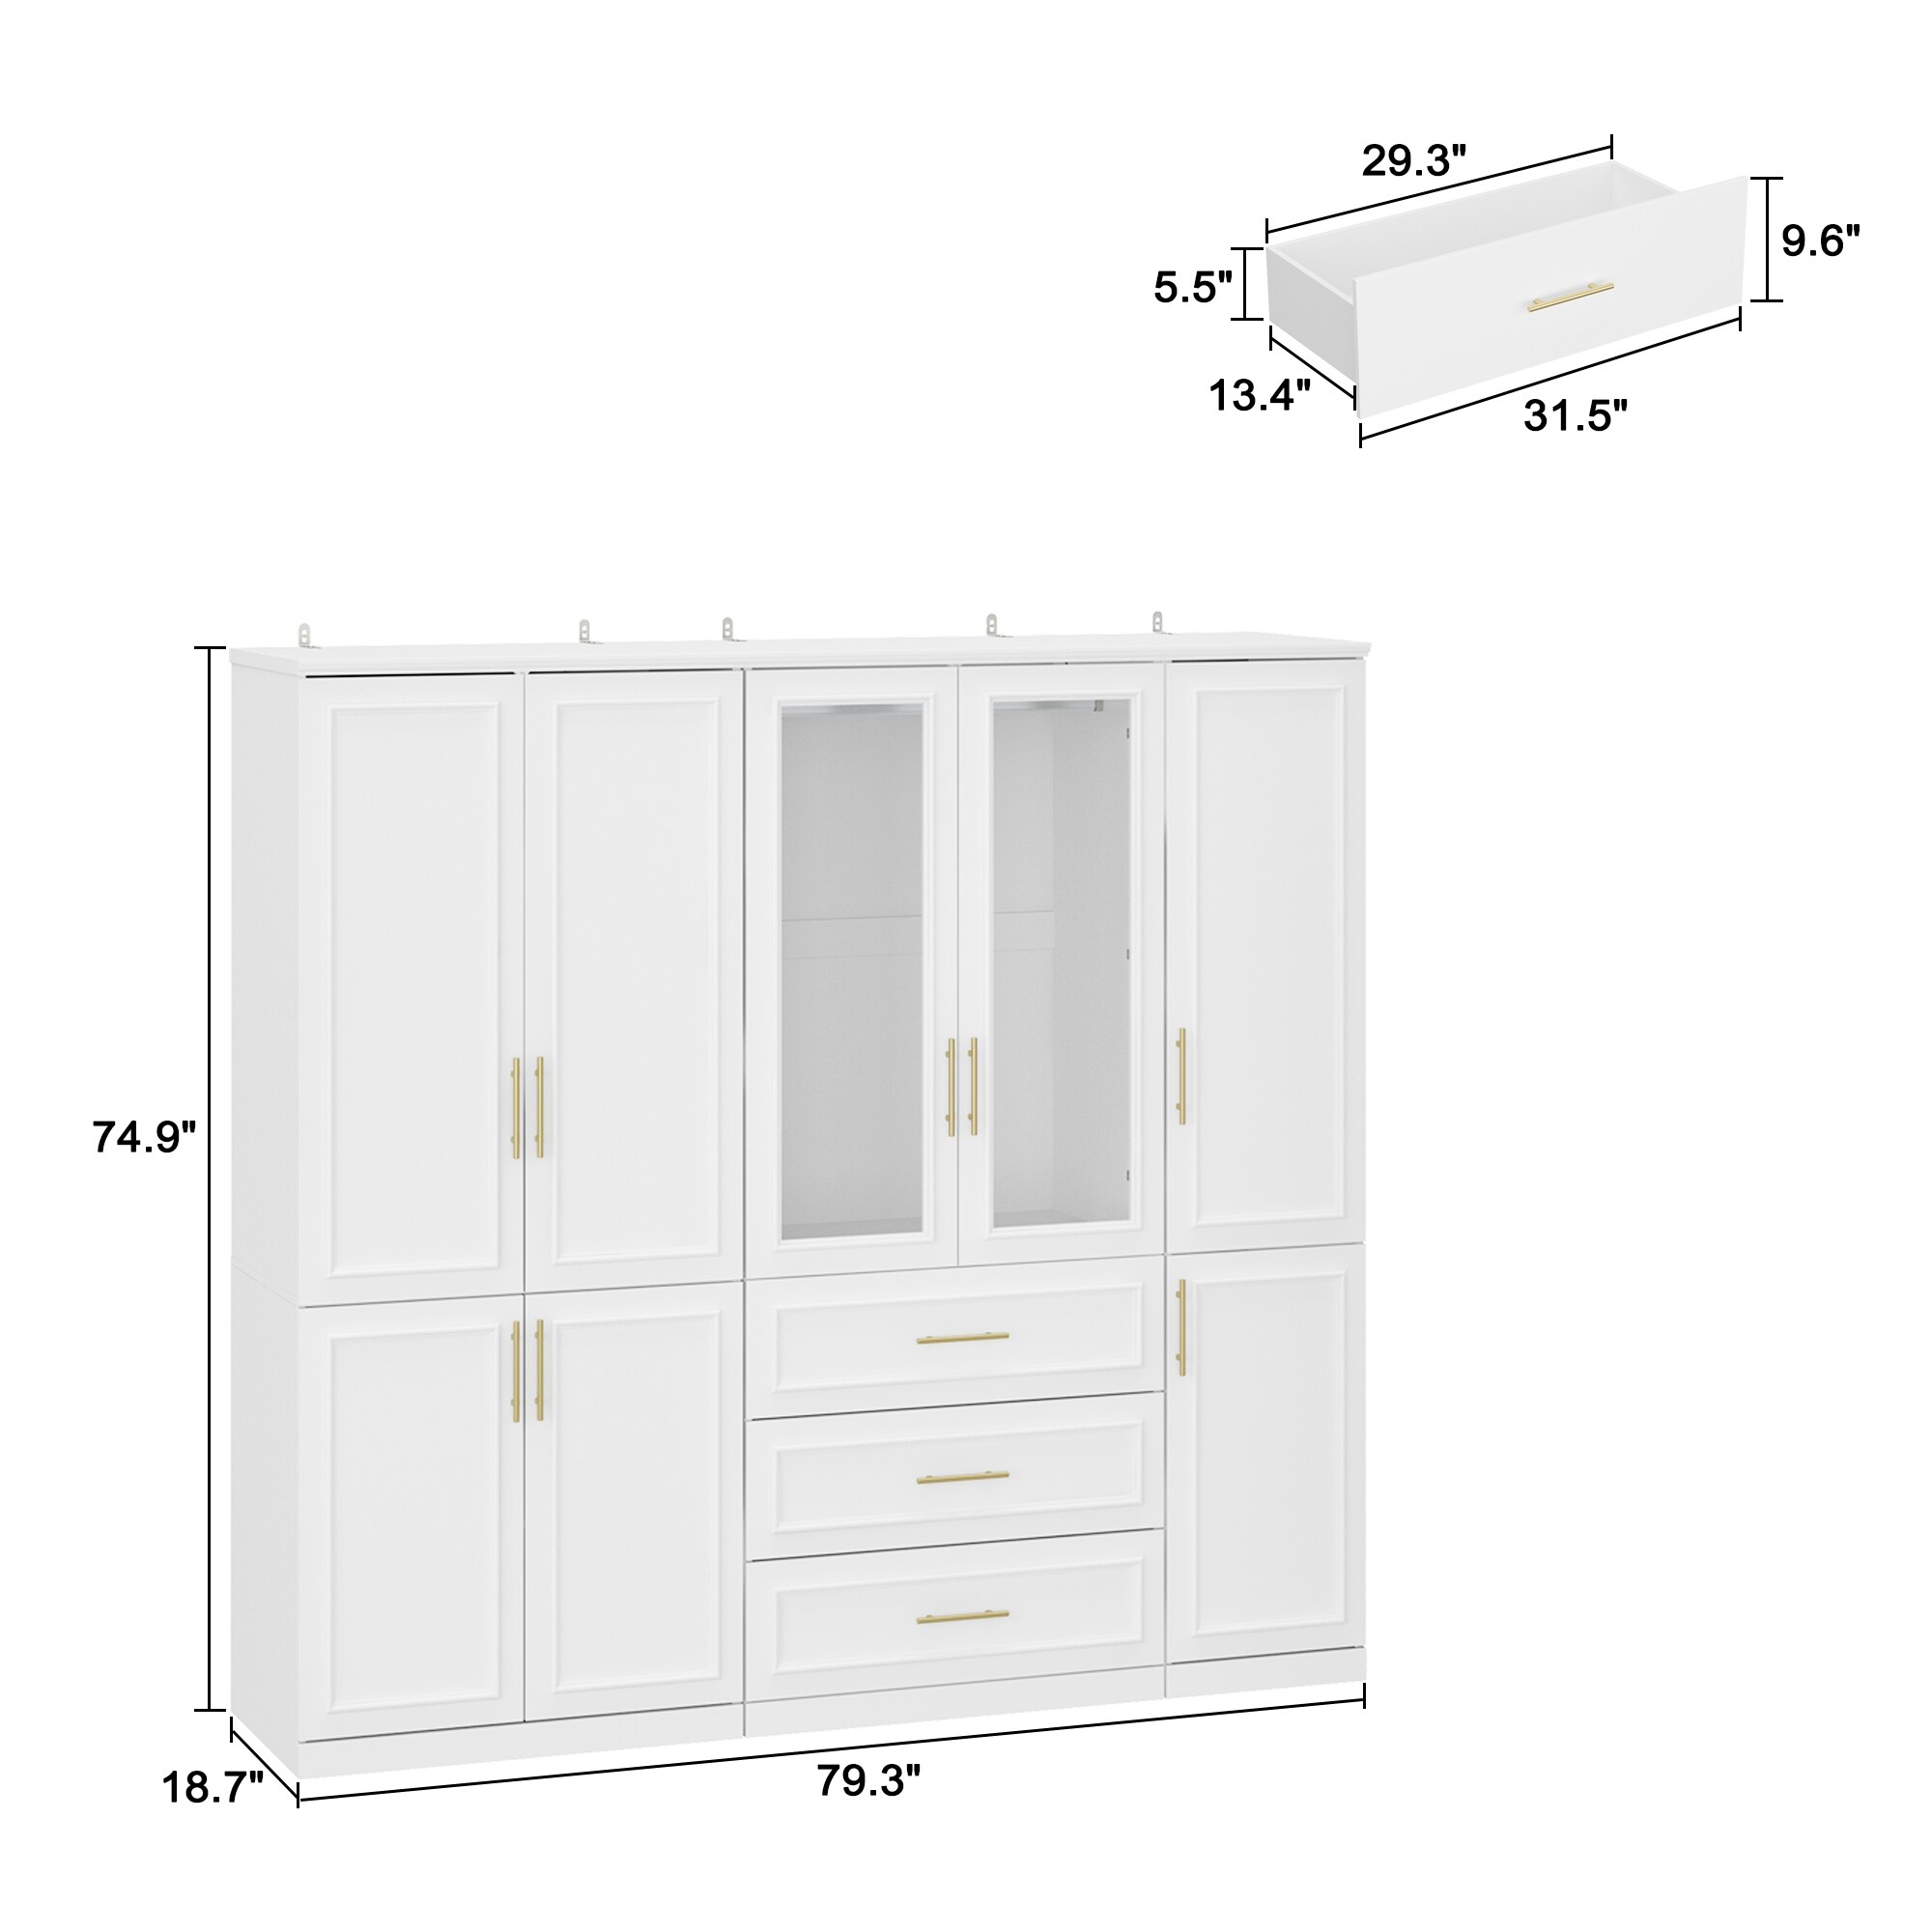 https://ak1.ostkcdn.com/images/products/is/images/direct/c4368aefabfc01fb6d6ab7dfb938ec3af665aef1/Modular-Wardrobe-Combo-Armoires-Closet-Freestanding-Cabinet-Organizer.jpg